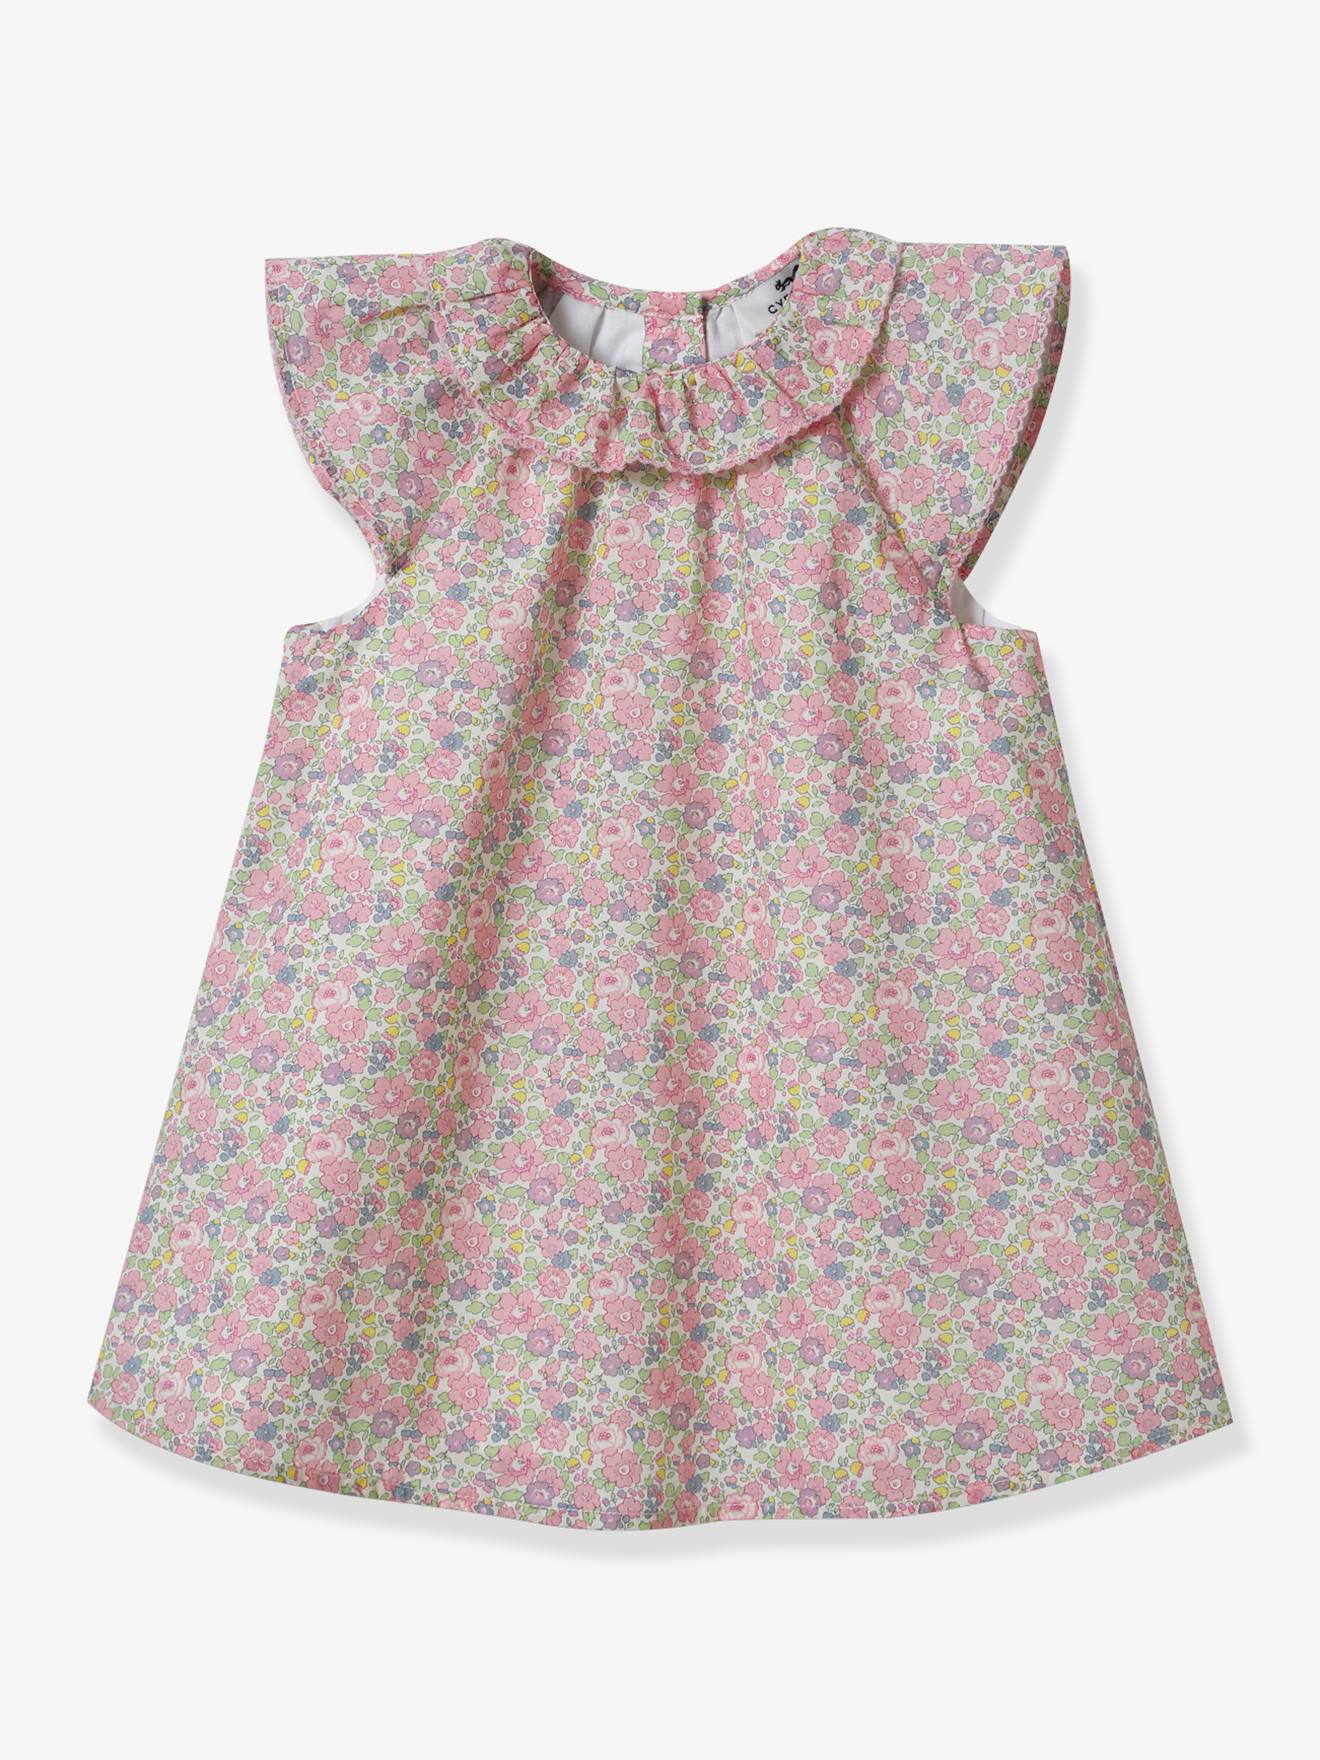 Dress in Liberty(r) Fabric for Babies, by CYRILLUS printed pink